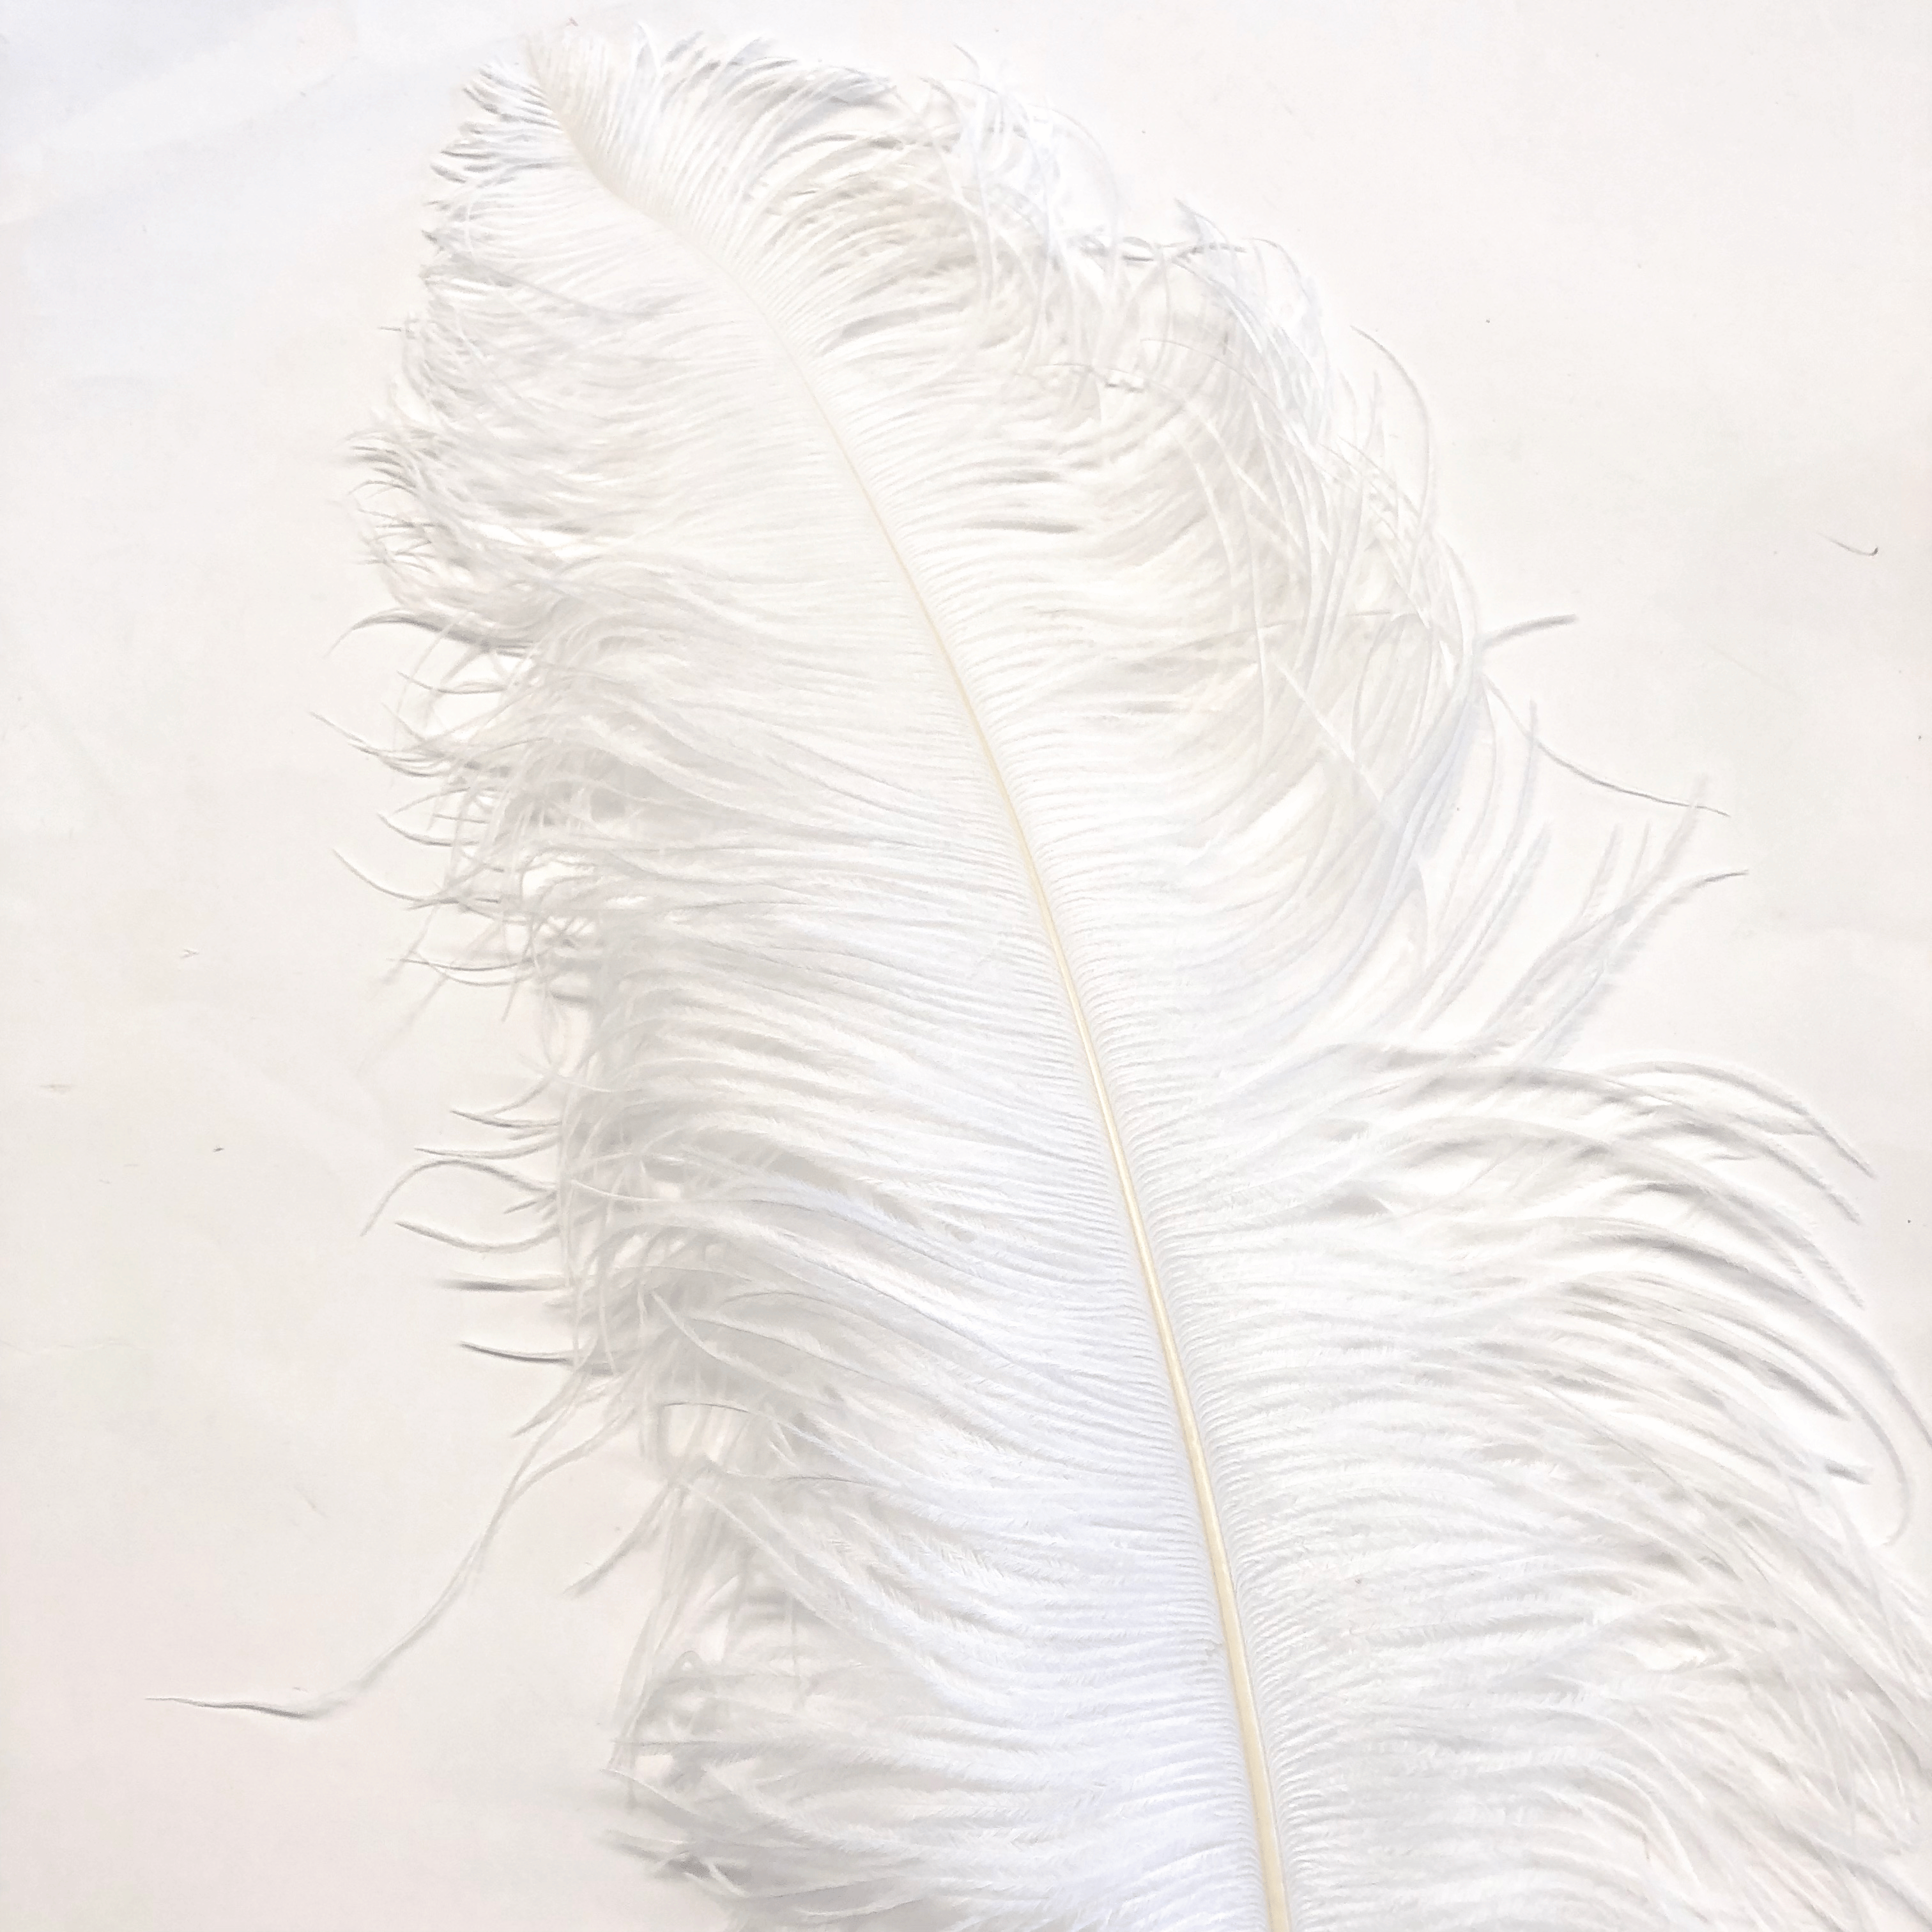 Ostrich Wing Feather Plumes 30-35cm (12-14") - White ((SECONDS))